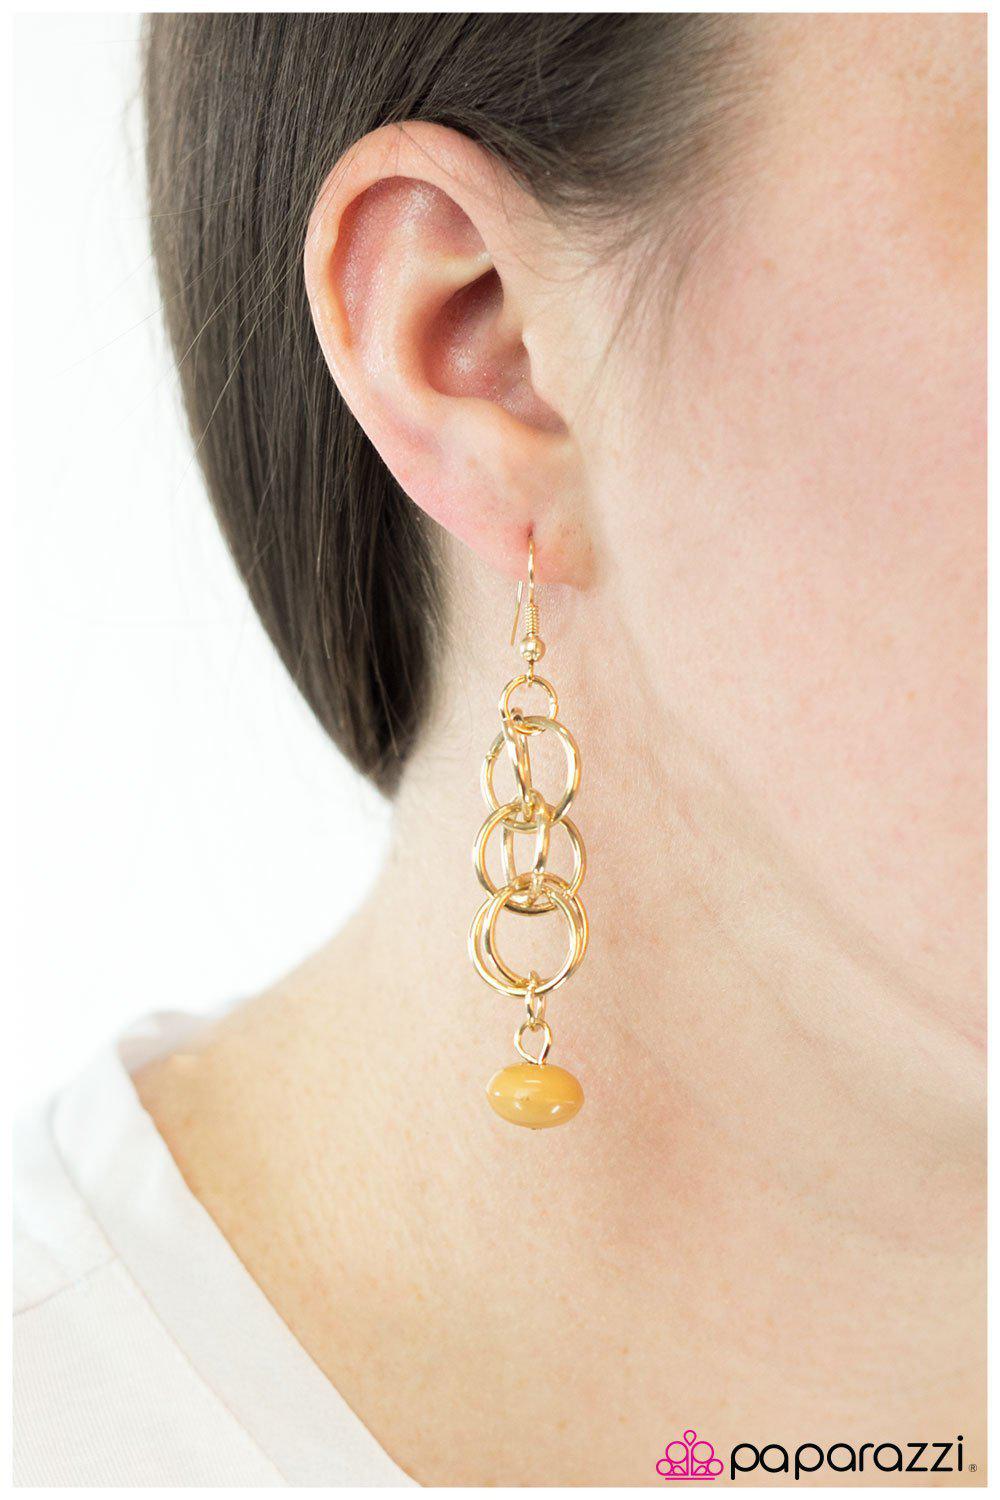 Marvelously Marvelous Yellow and Gold Earrings - Paparazzi Accessories-CarasShop.com - $5 Jewelry by Cara Jewels